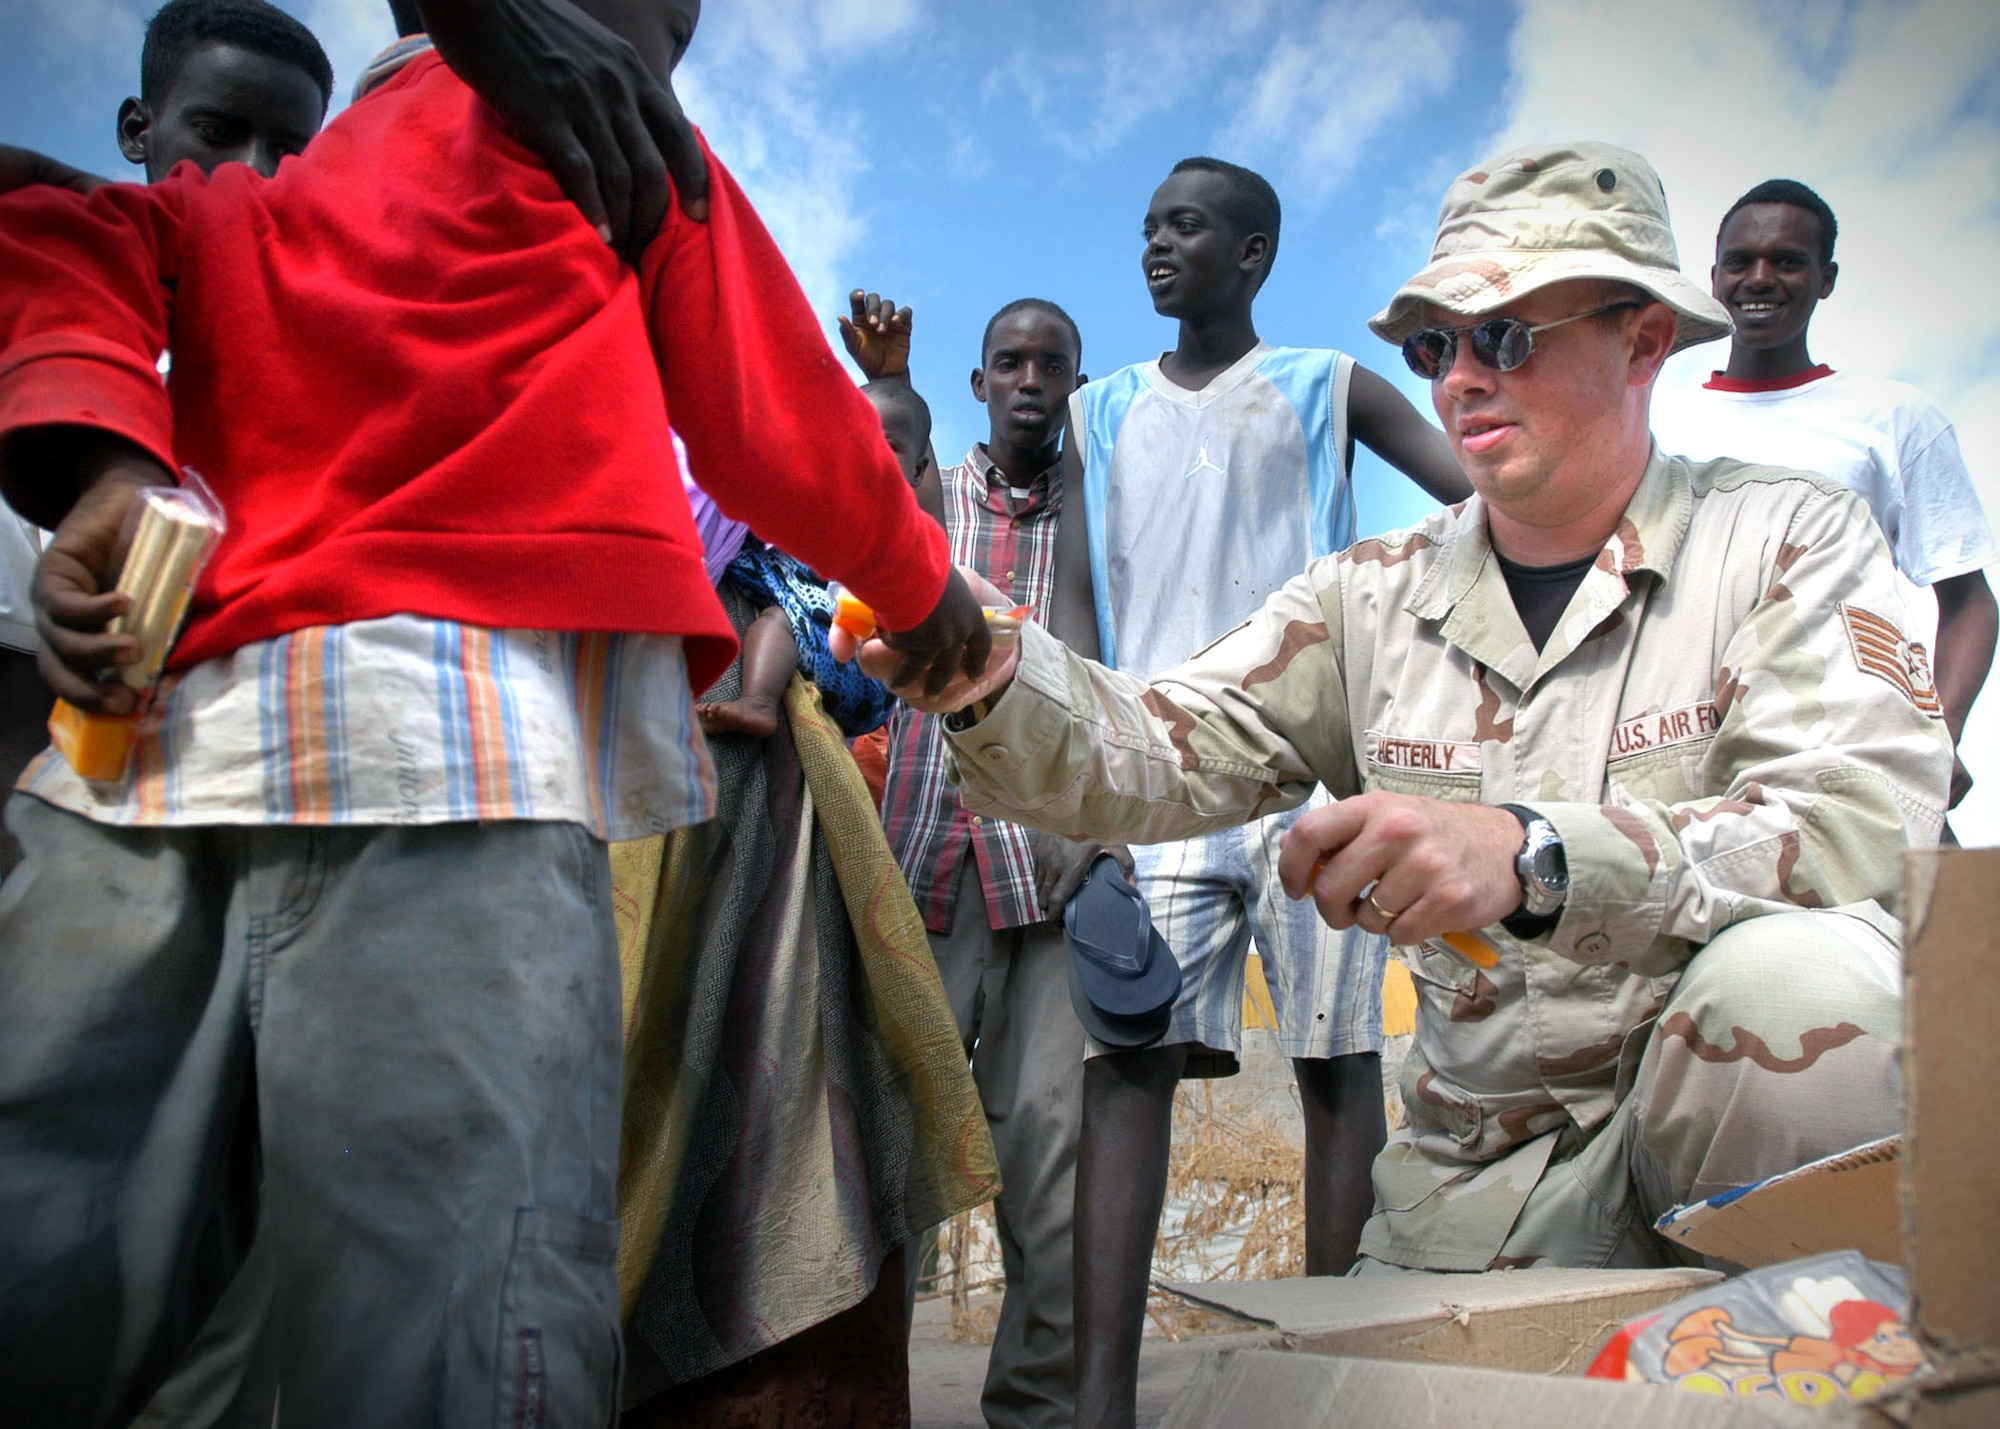 Tech. Sgt. Chris Shetterly gives away candy to children Jan. 9 during a visit to Damerjong district, Djibouti.  The candy was donated by the 350th Civil Affairs Company, attached to the Combined Joint Task Force - Horn of Africa.  (U.S. Navy photo/Chief Petty Officer Eric A. Clement)